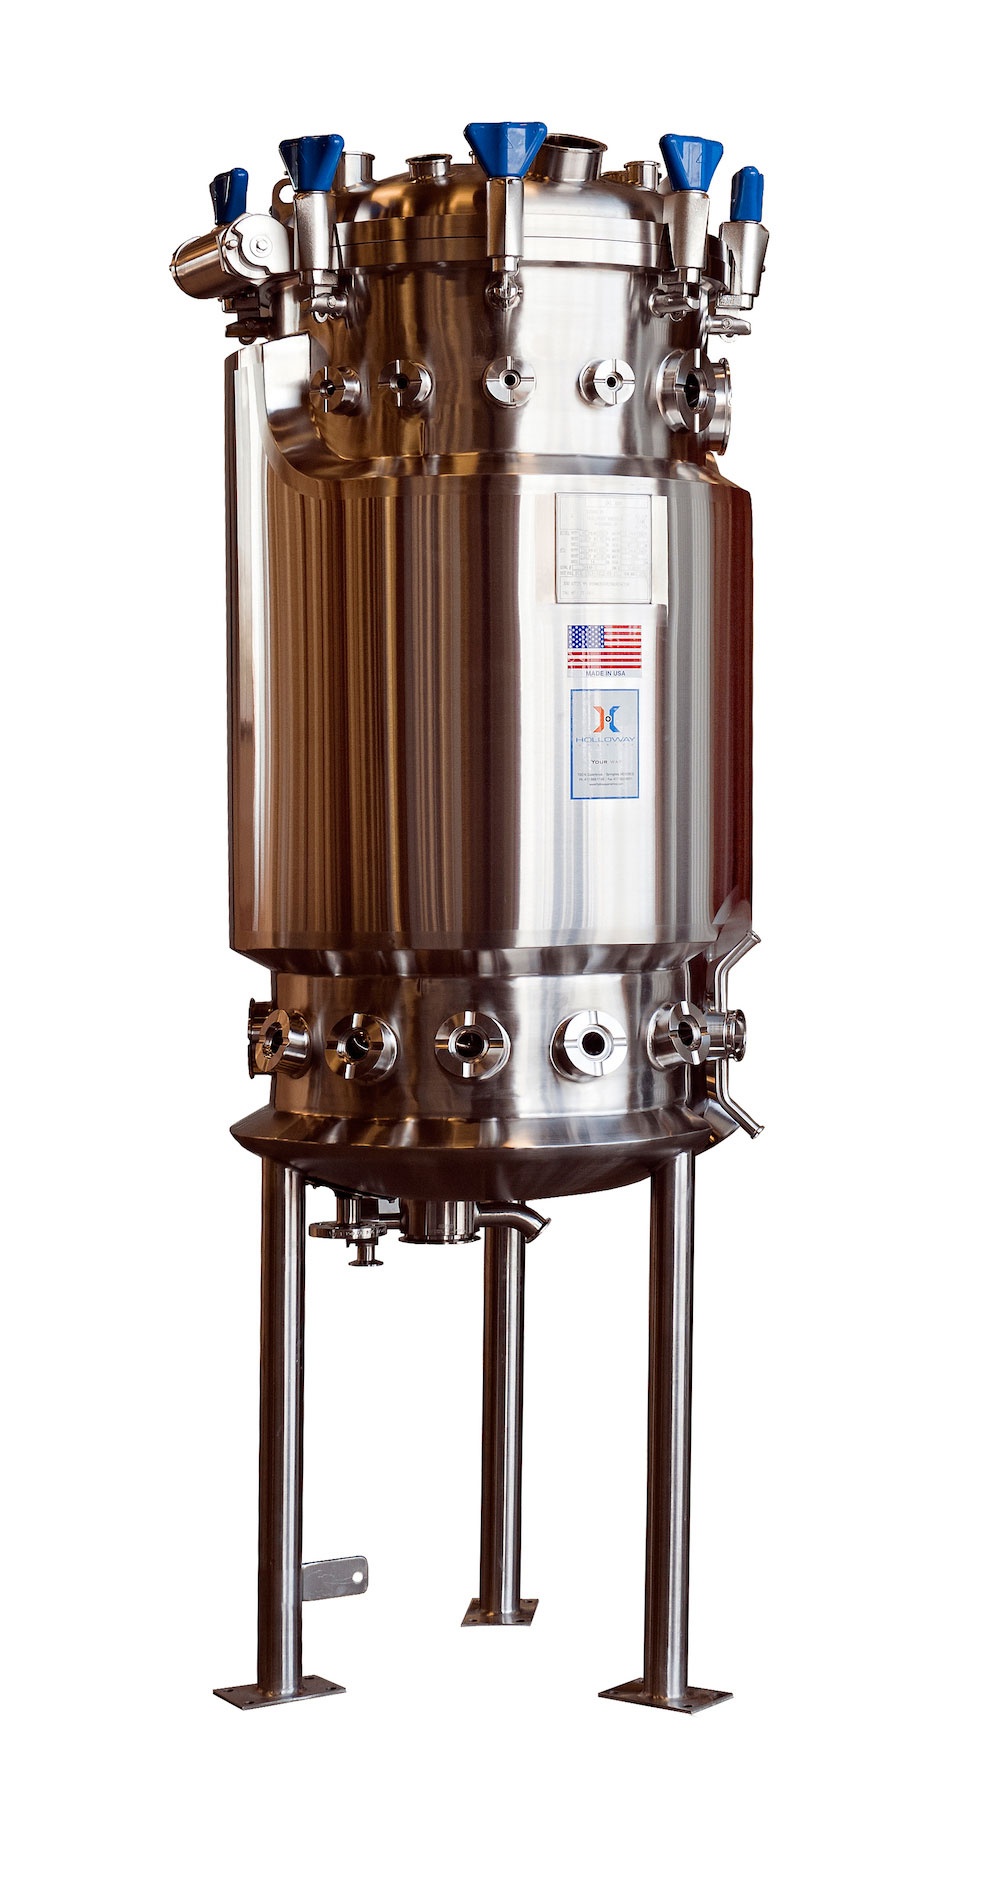 HOLLOWAY proudly produces pharmaceutical stainless steel solutions like this bioreactor.